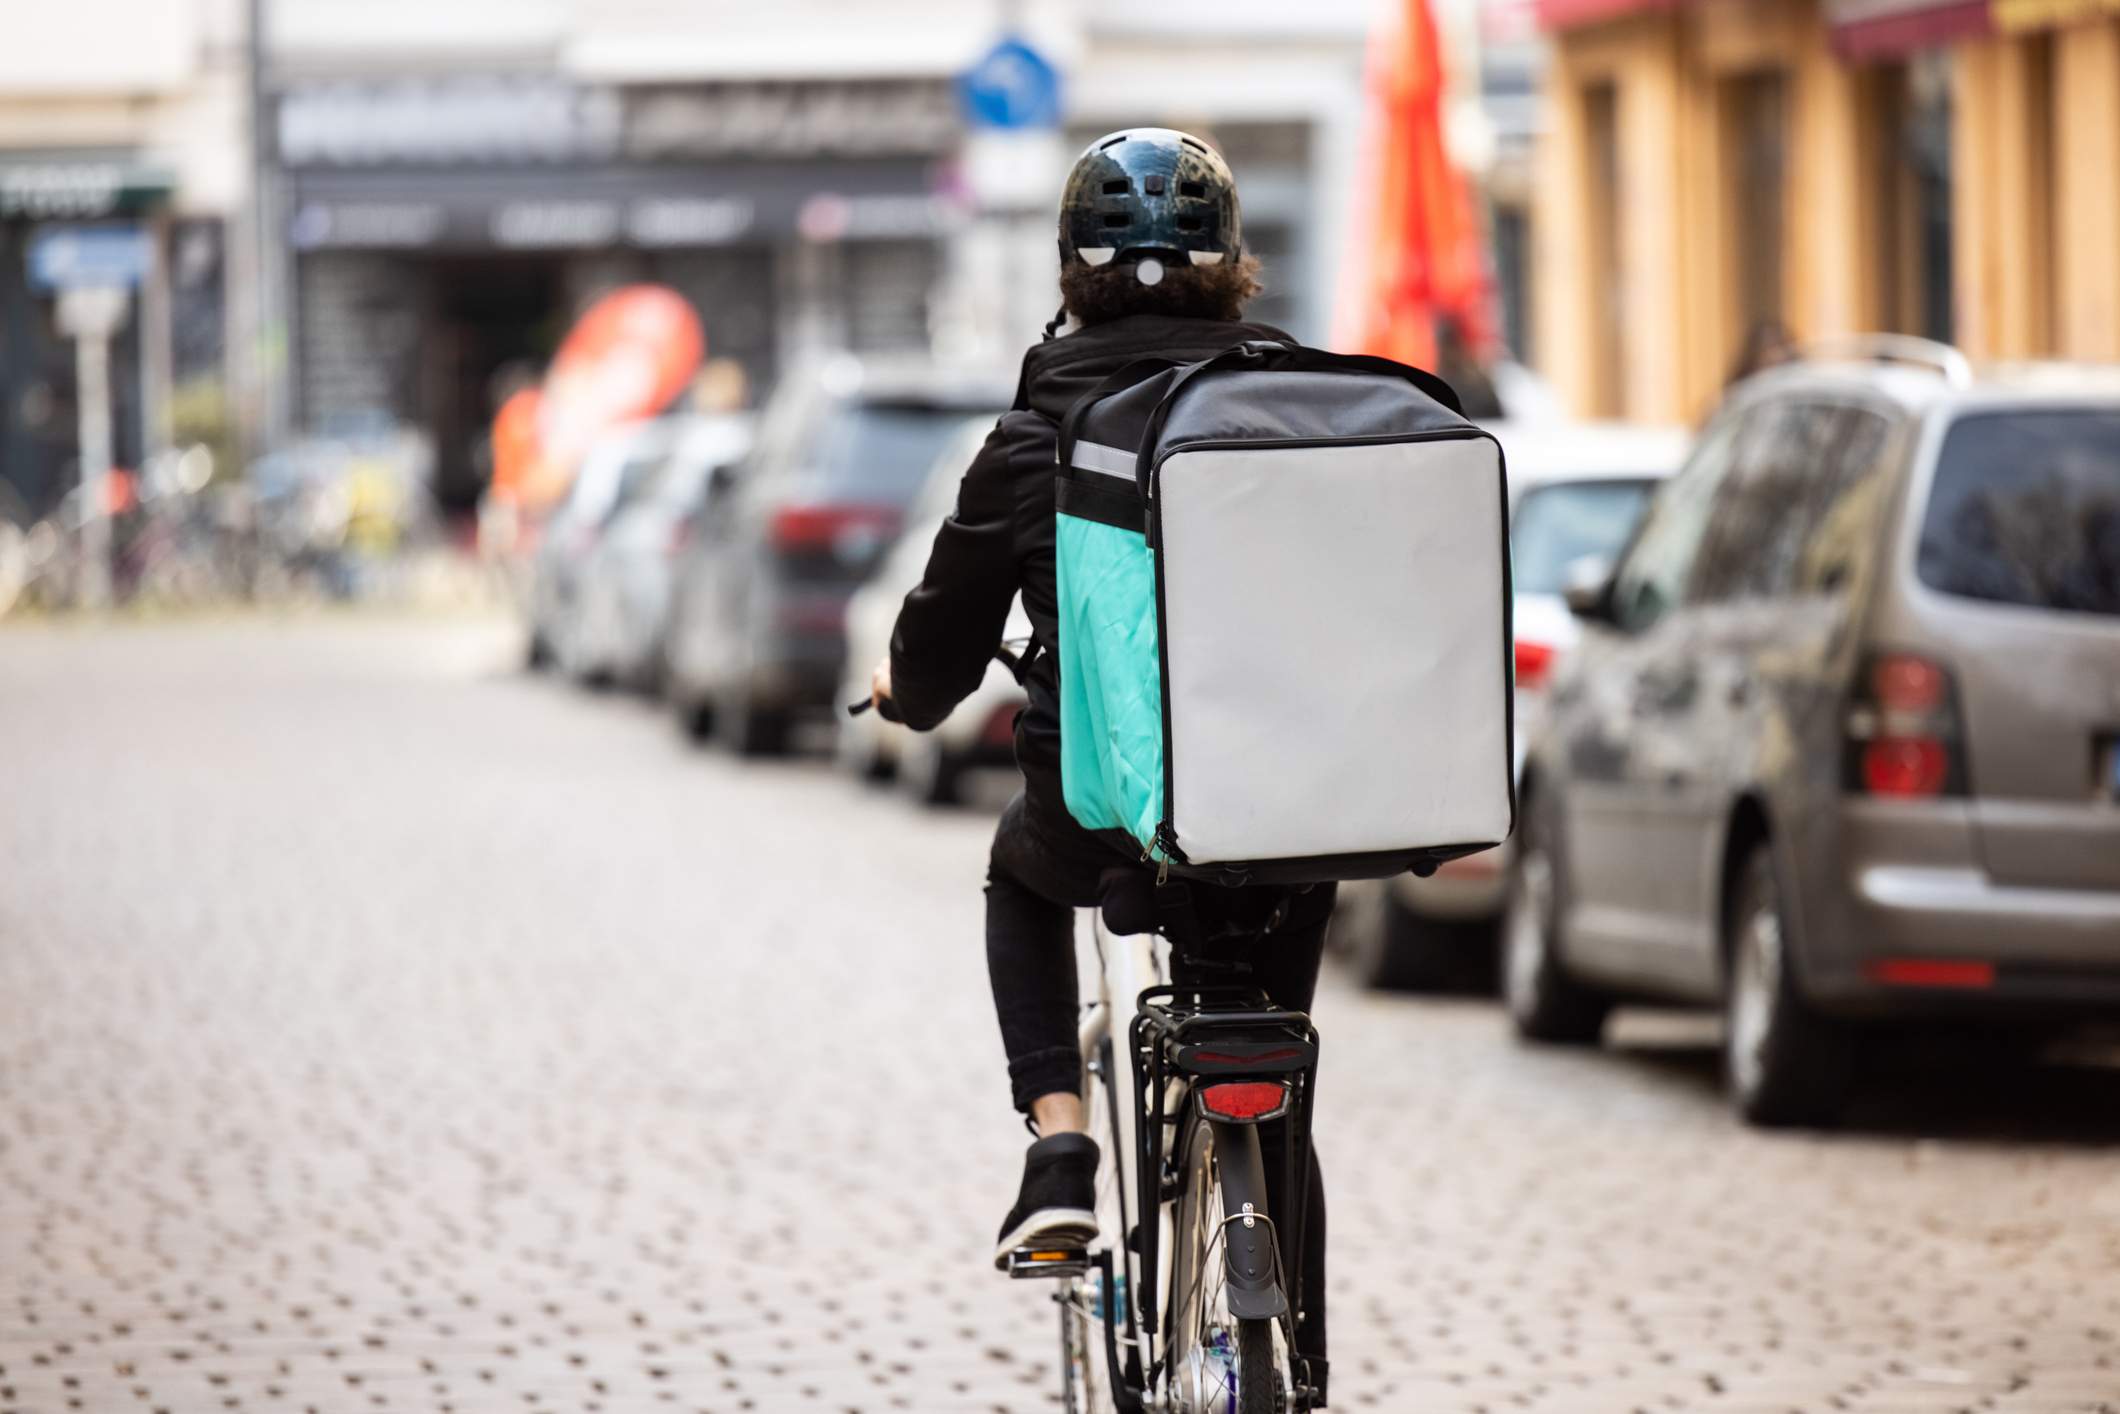 Image depicts a delivery driver with a teal cooler strapped to their back, They are biking down a cobblestone street. 